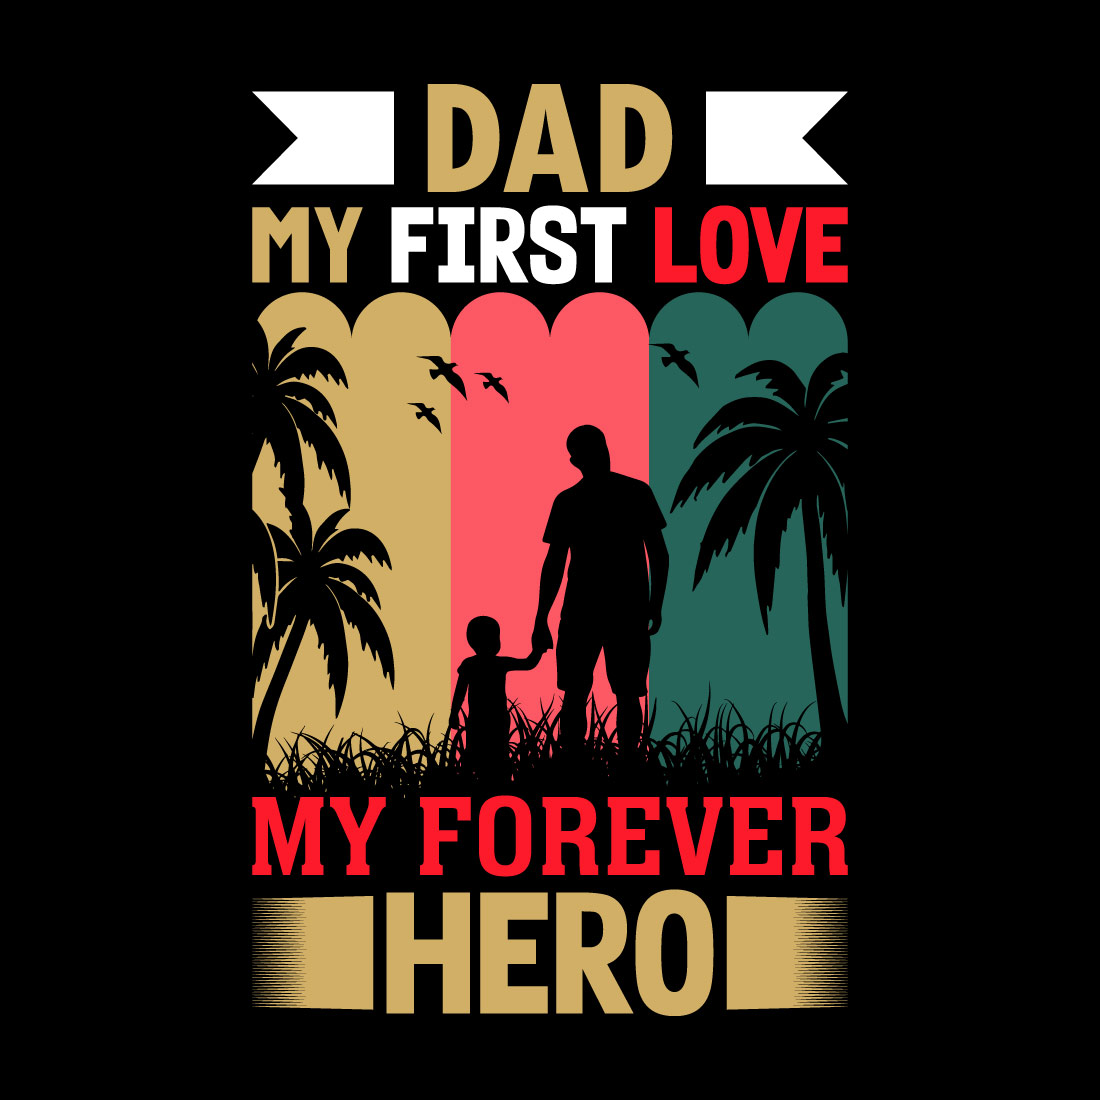 fathers day t shirt dad t shirt design father day tshirt happy fathers day t shirt design ideas dad day papa son fathers day shirt ideas for family 9 8